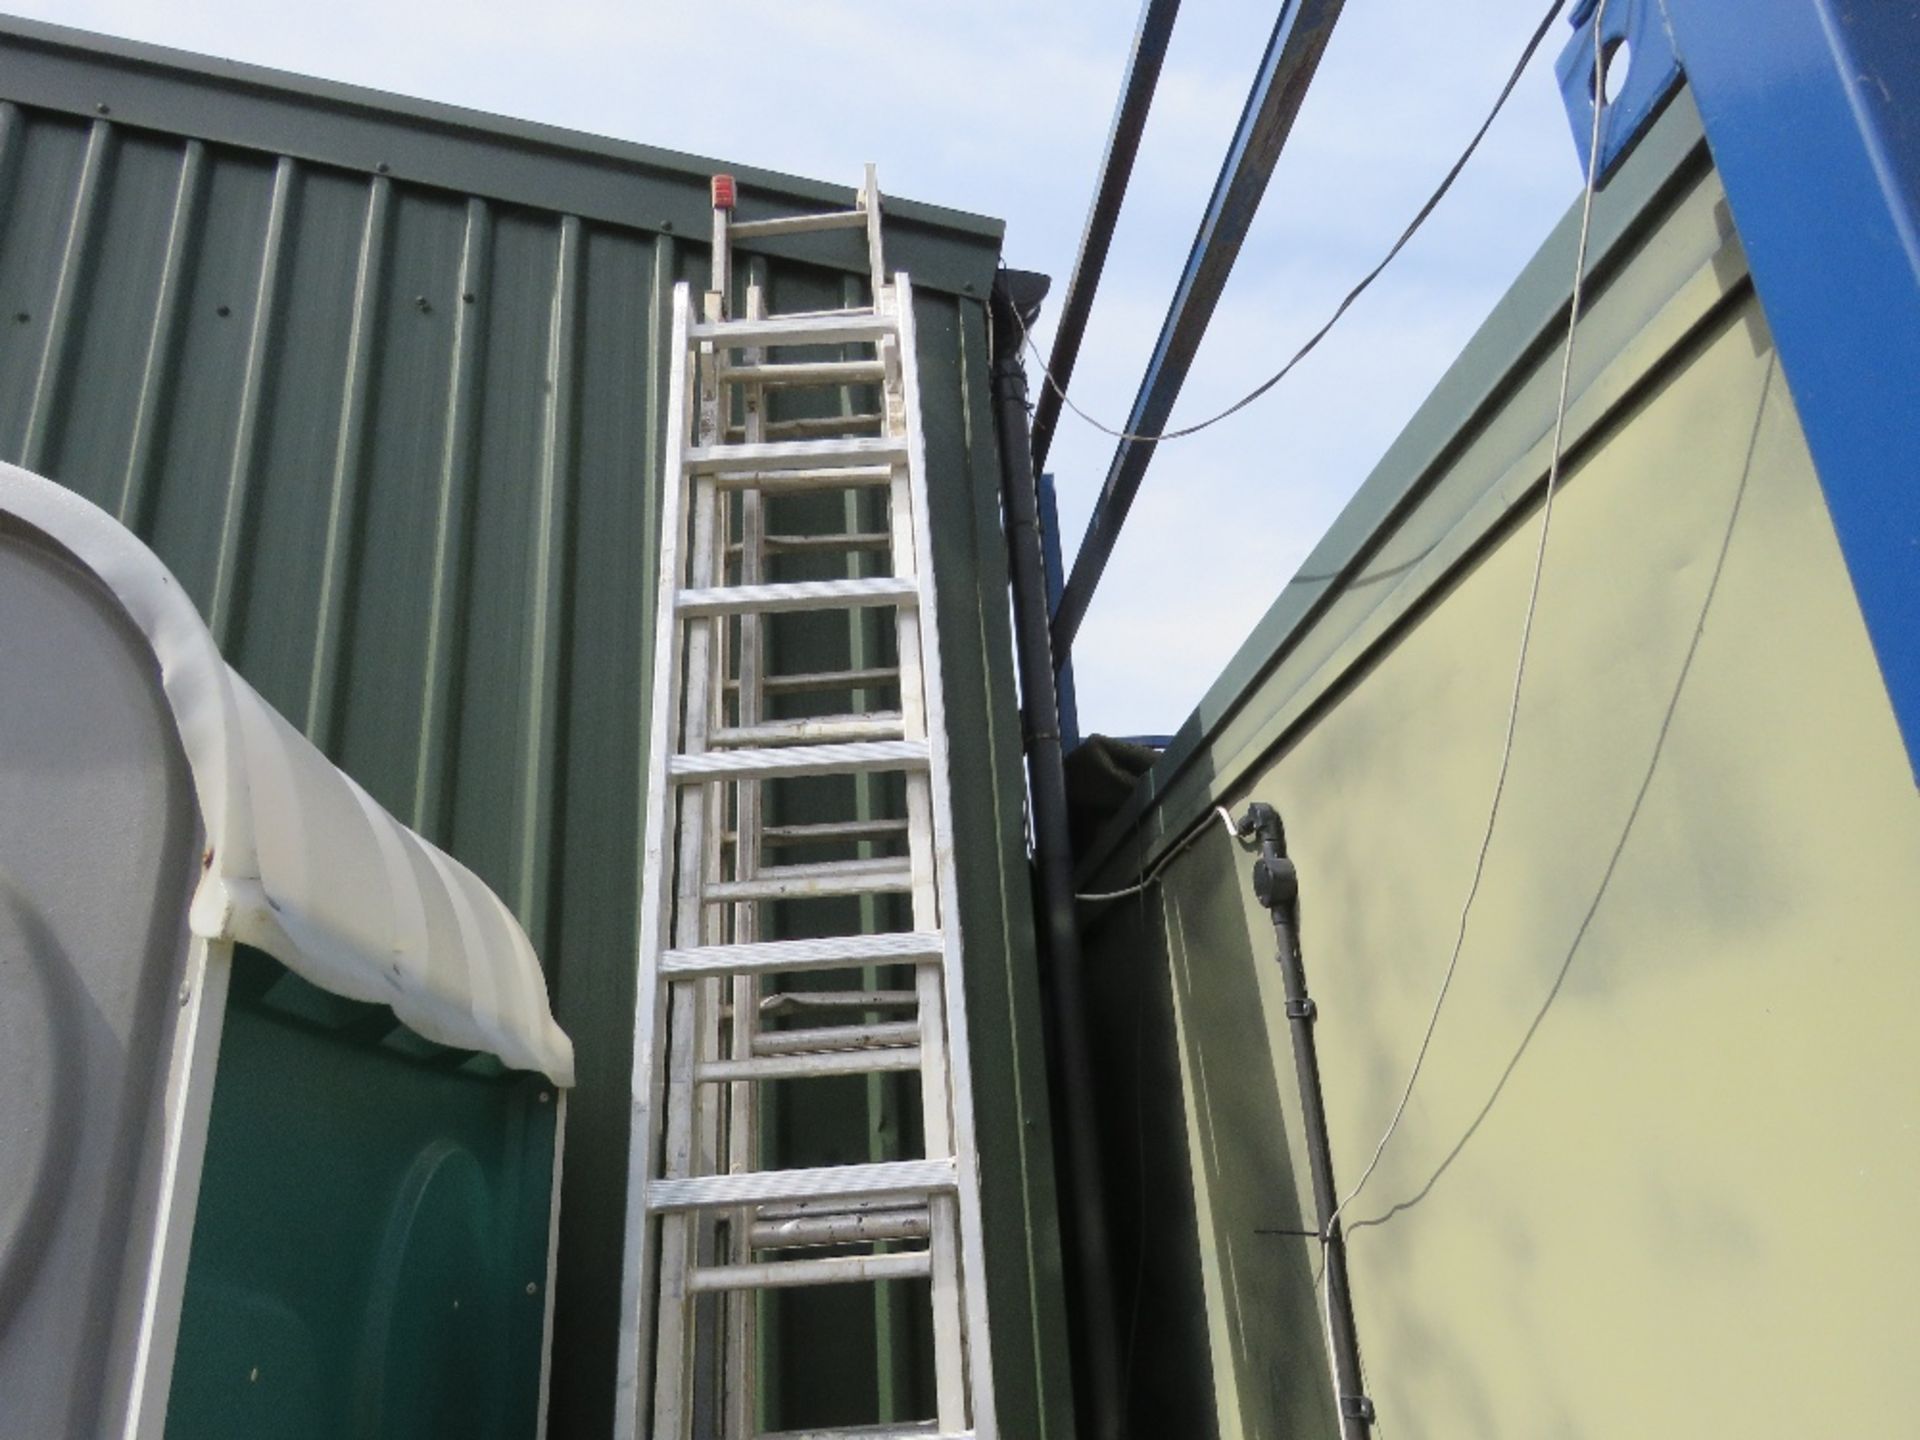 4NO ALUMINIUM SINGLE STAGE LADDERS SECTIONS. - Image 2 of 3